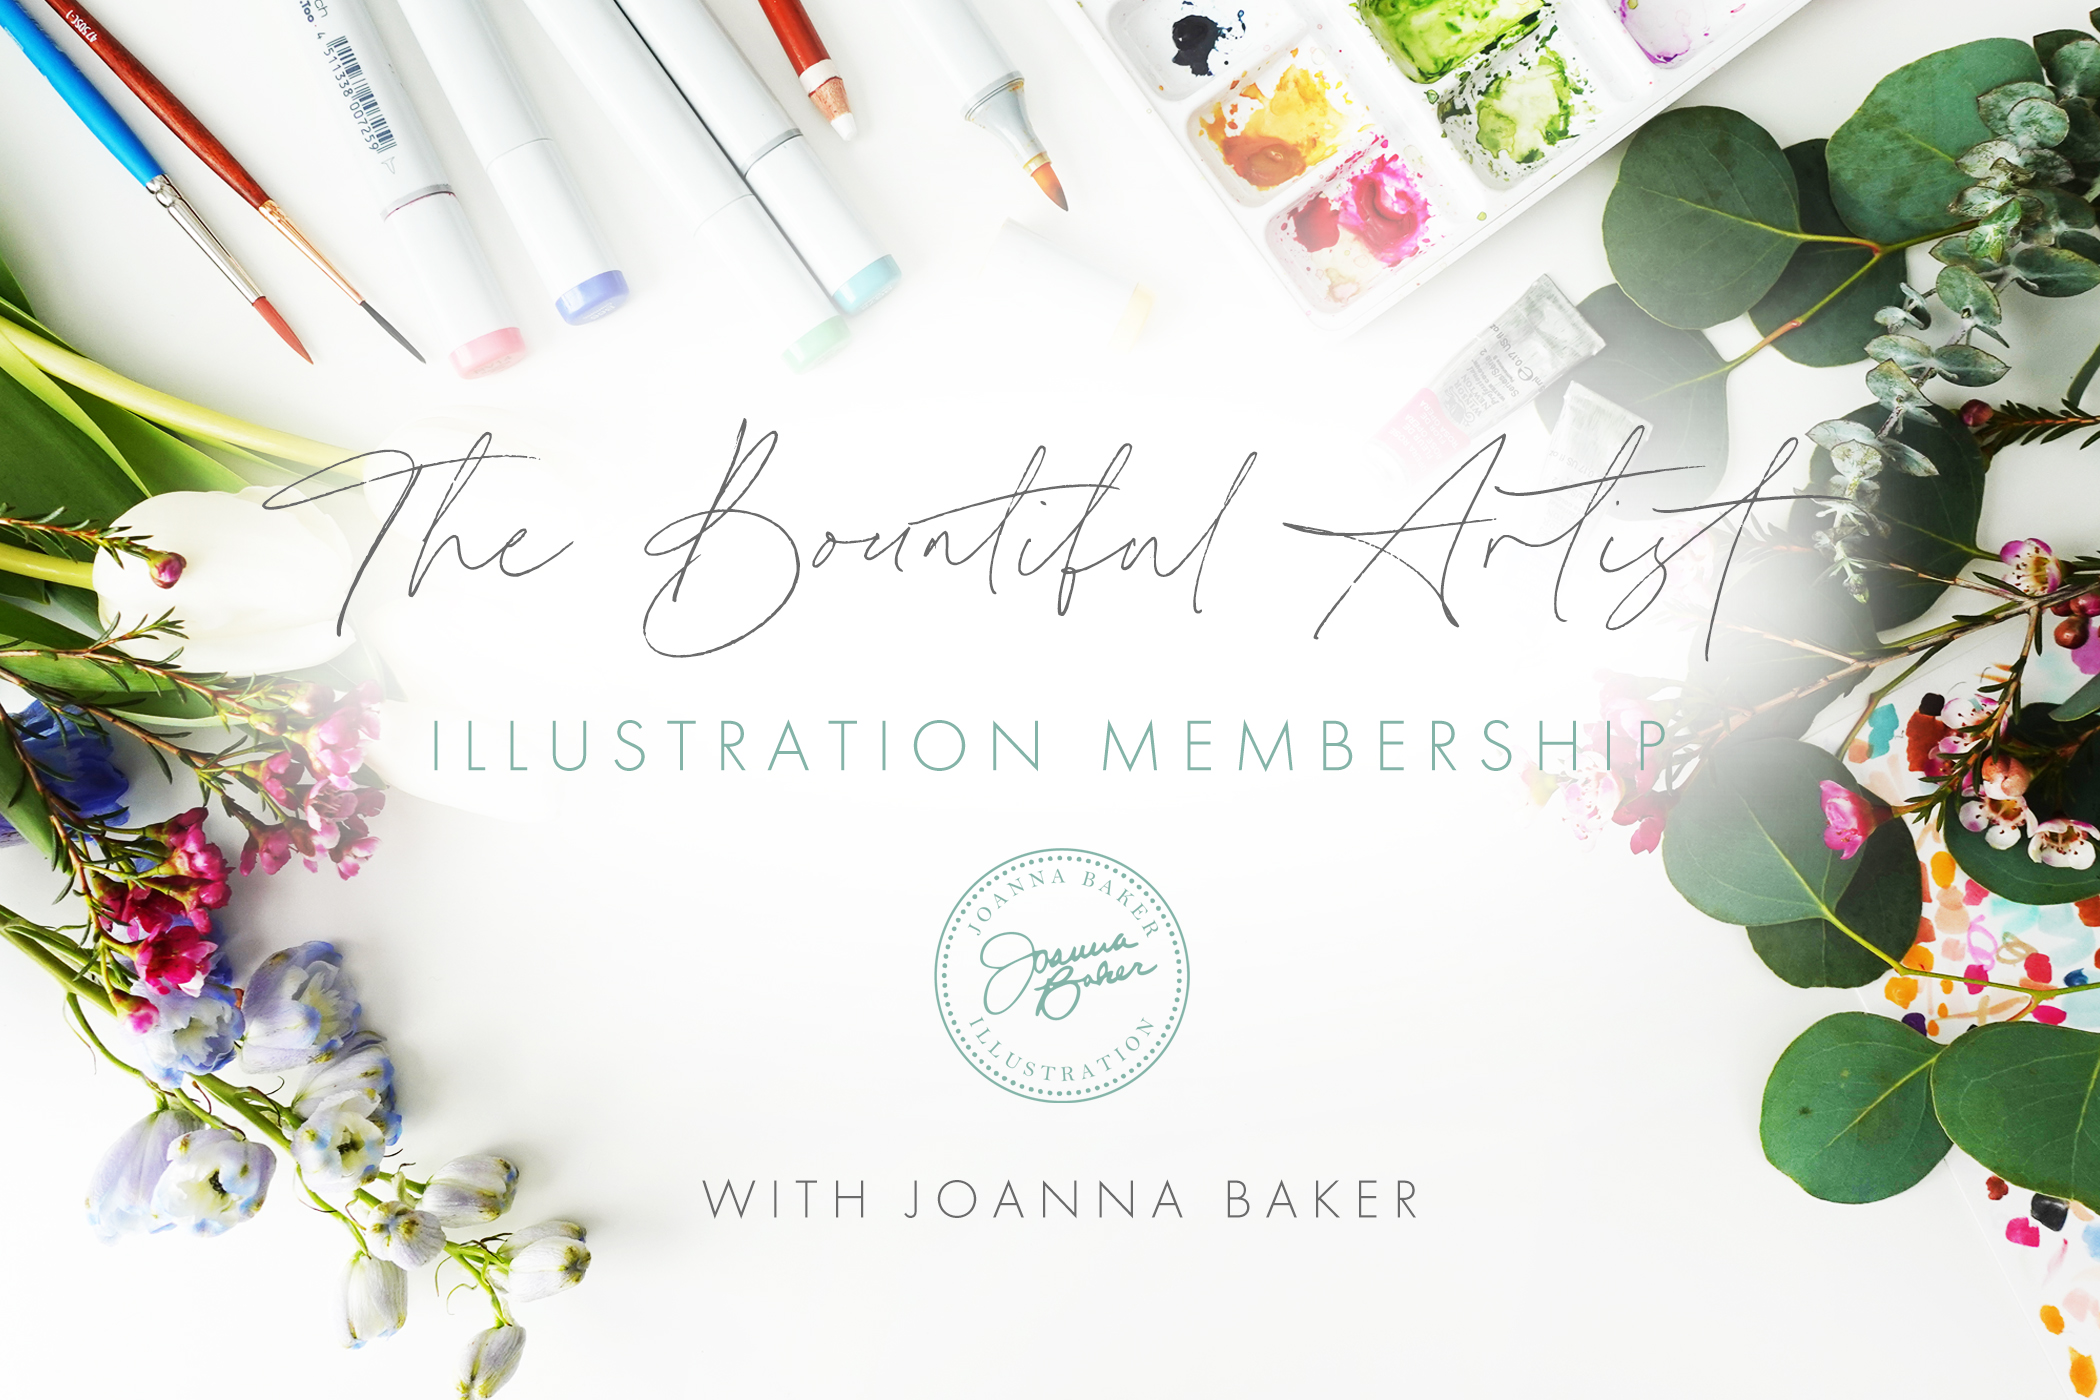 Join The Bountiful Artist Monthly Illustration Membership with Joanna Baker